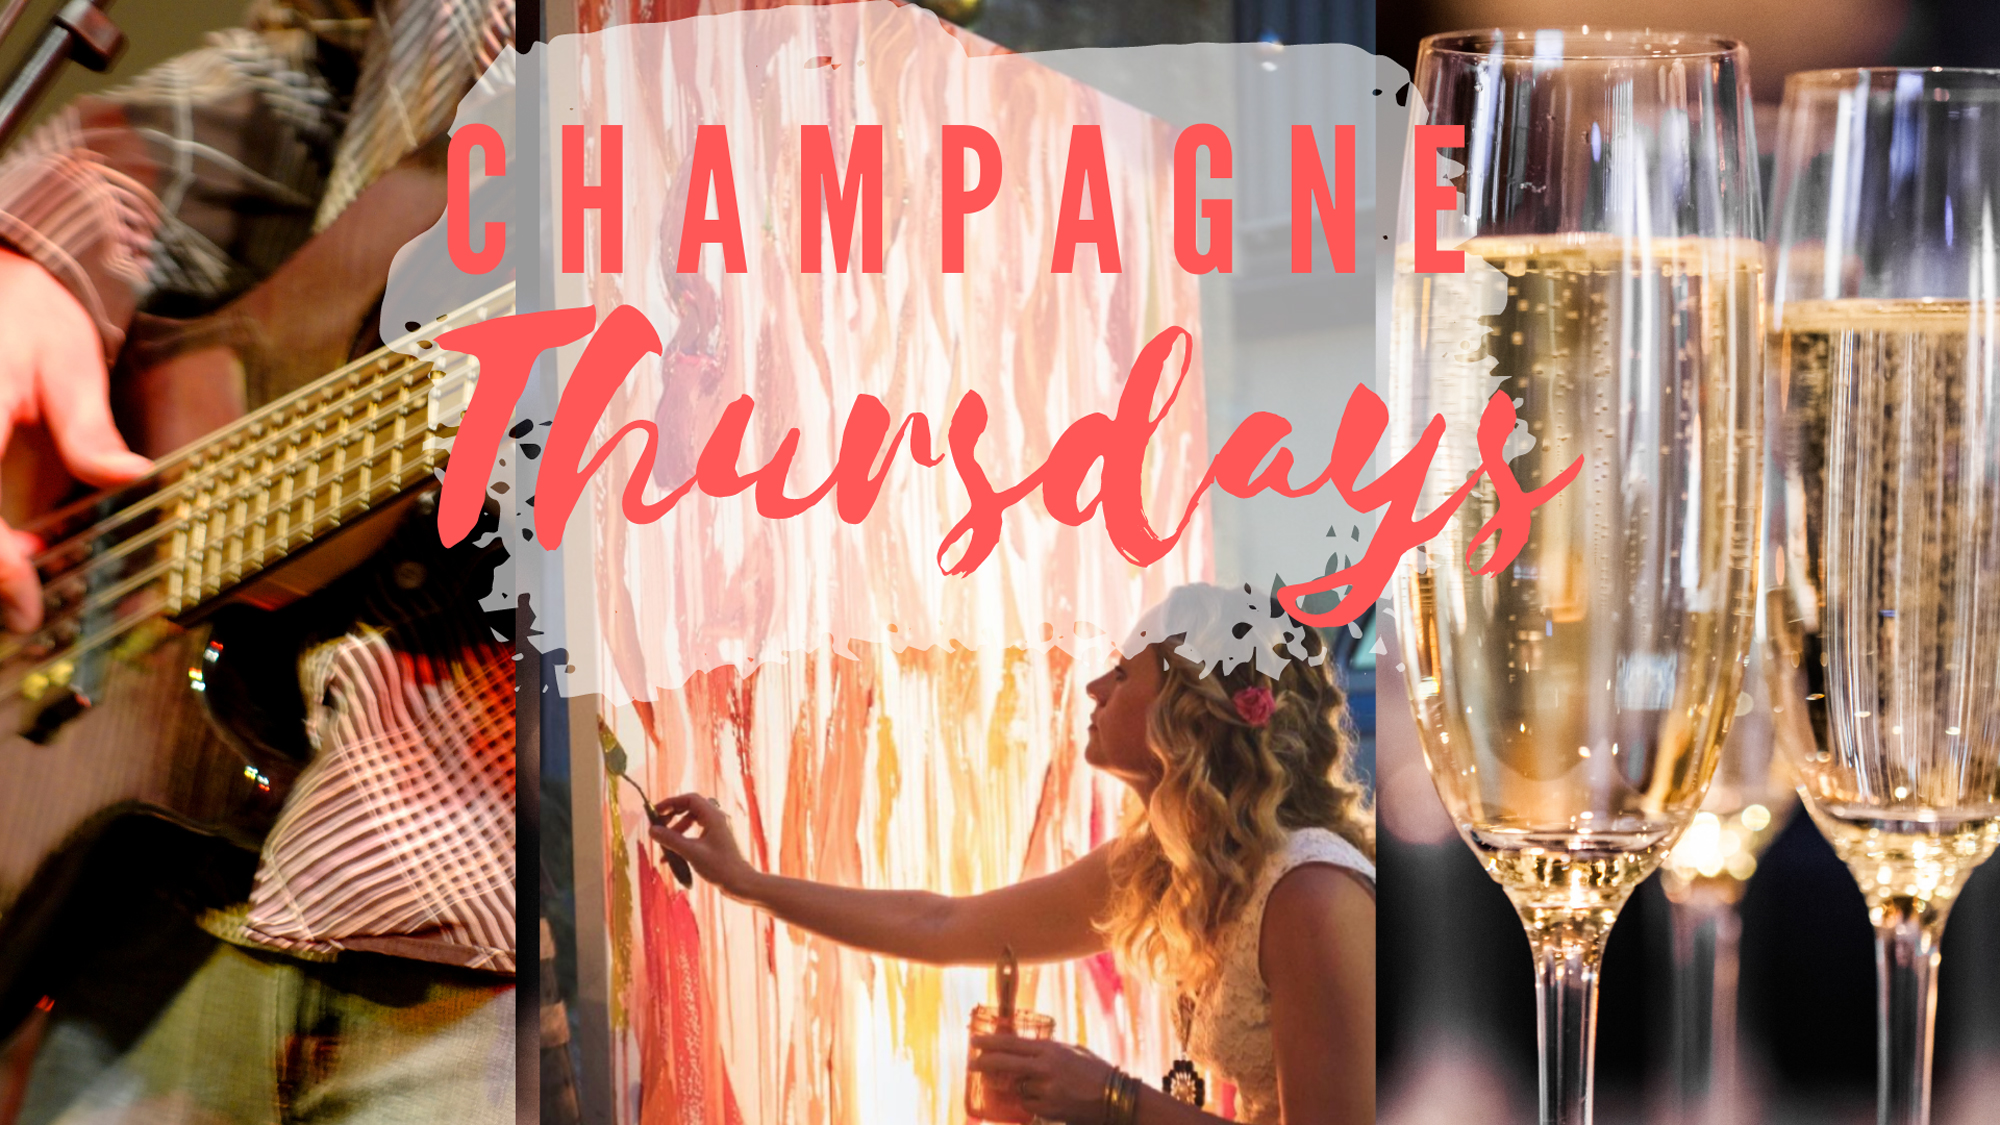 Acumen Wine Gallery Presents: Champagne, Live Painting & Music Every Thursday Night This Summer